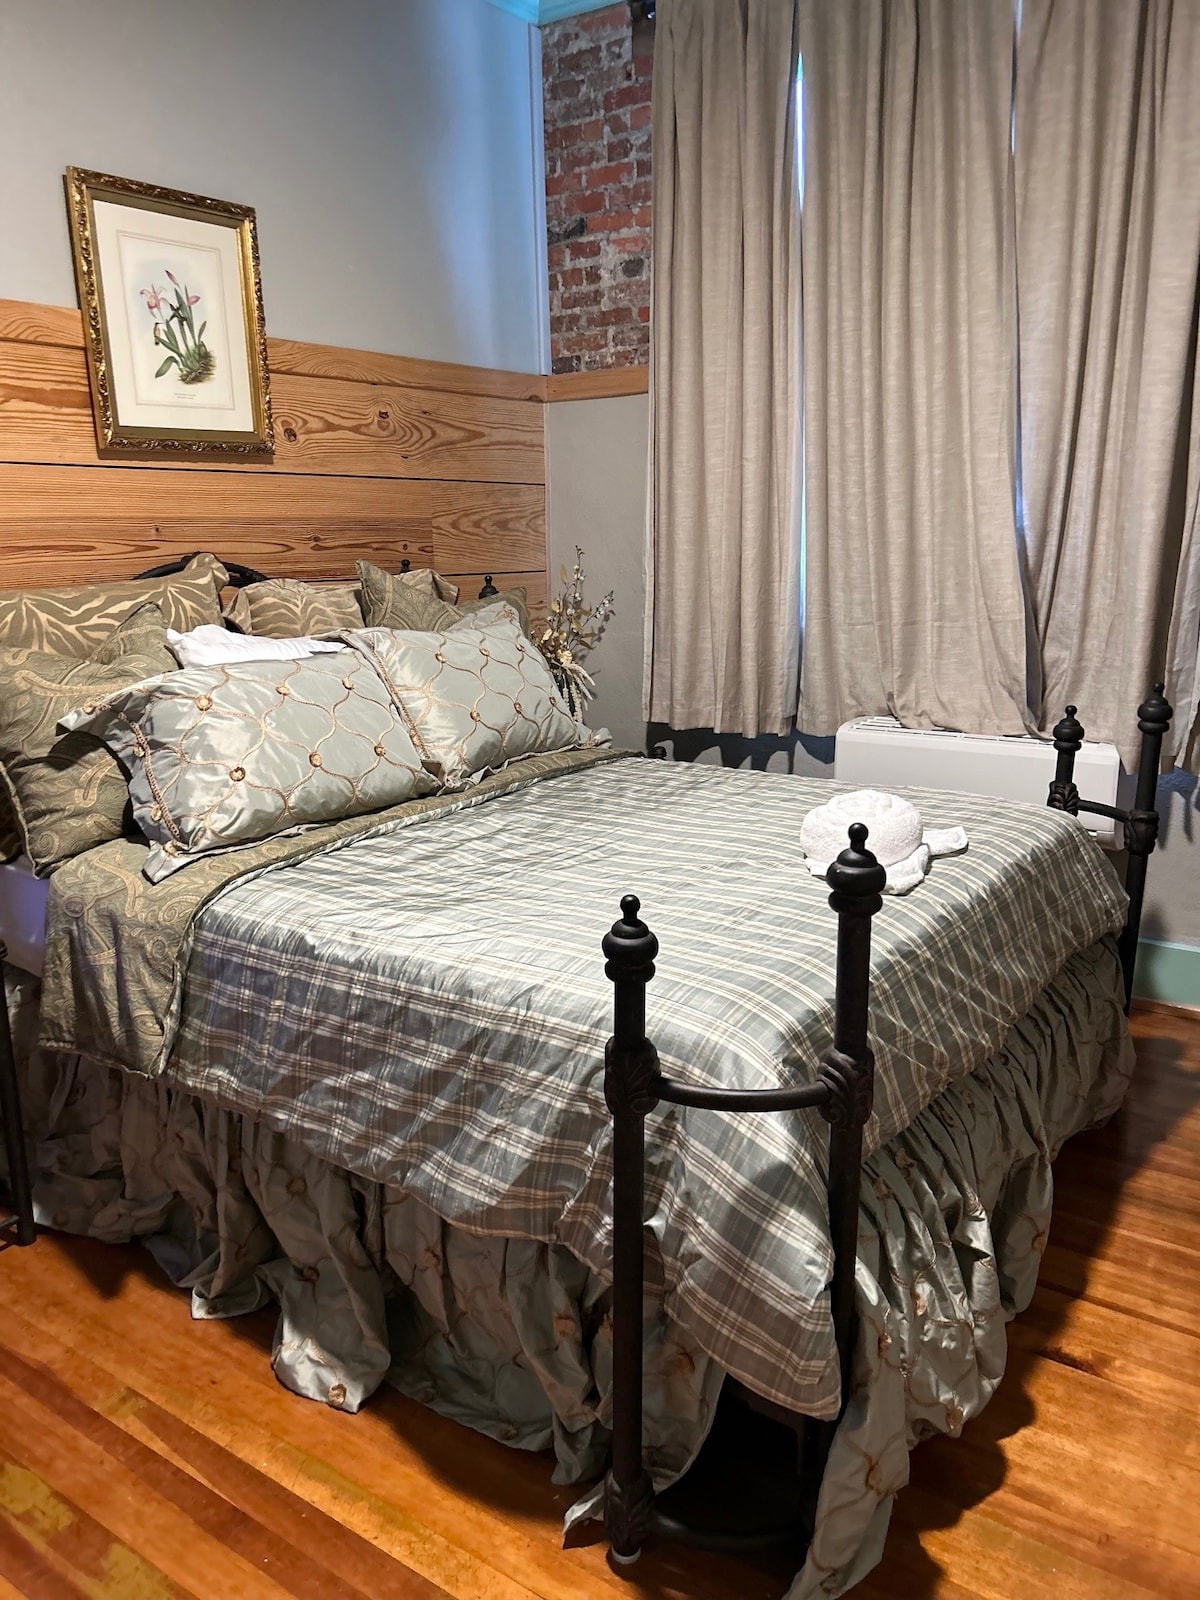 Room 6 (sleeps 2) at Chipley's Squareview Inn